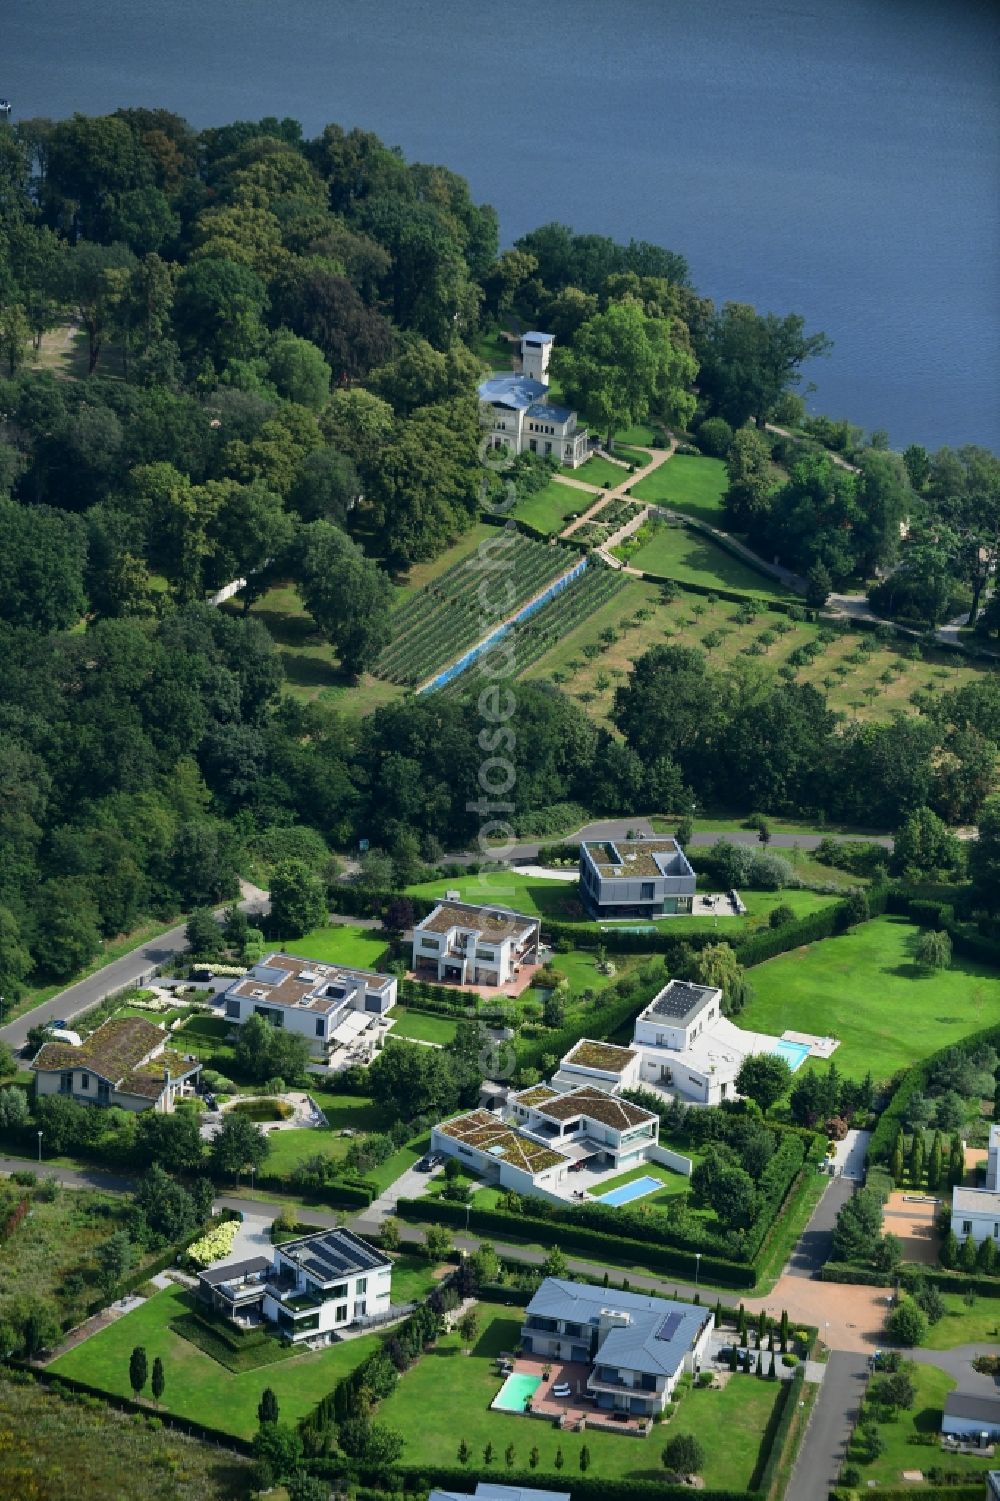 Potsdam from the bird's eye view: Luxury villa in residential area of single-family settlement in the district Nauener Vorstadt in Potsdam in the state Brandenburg, Germany